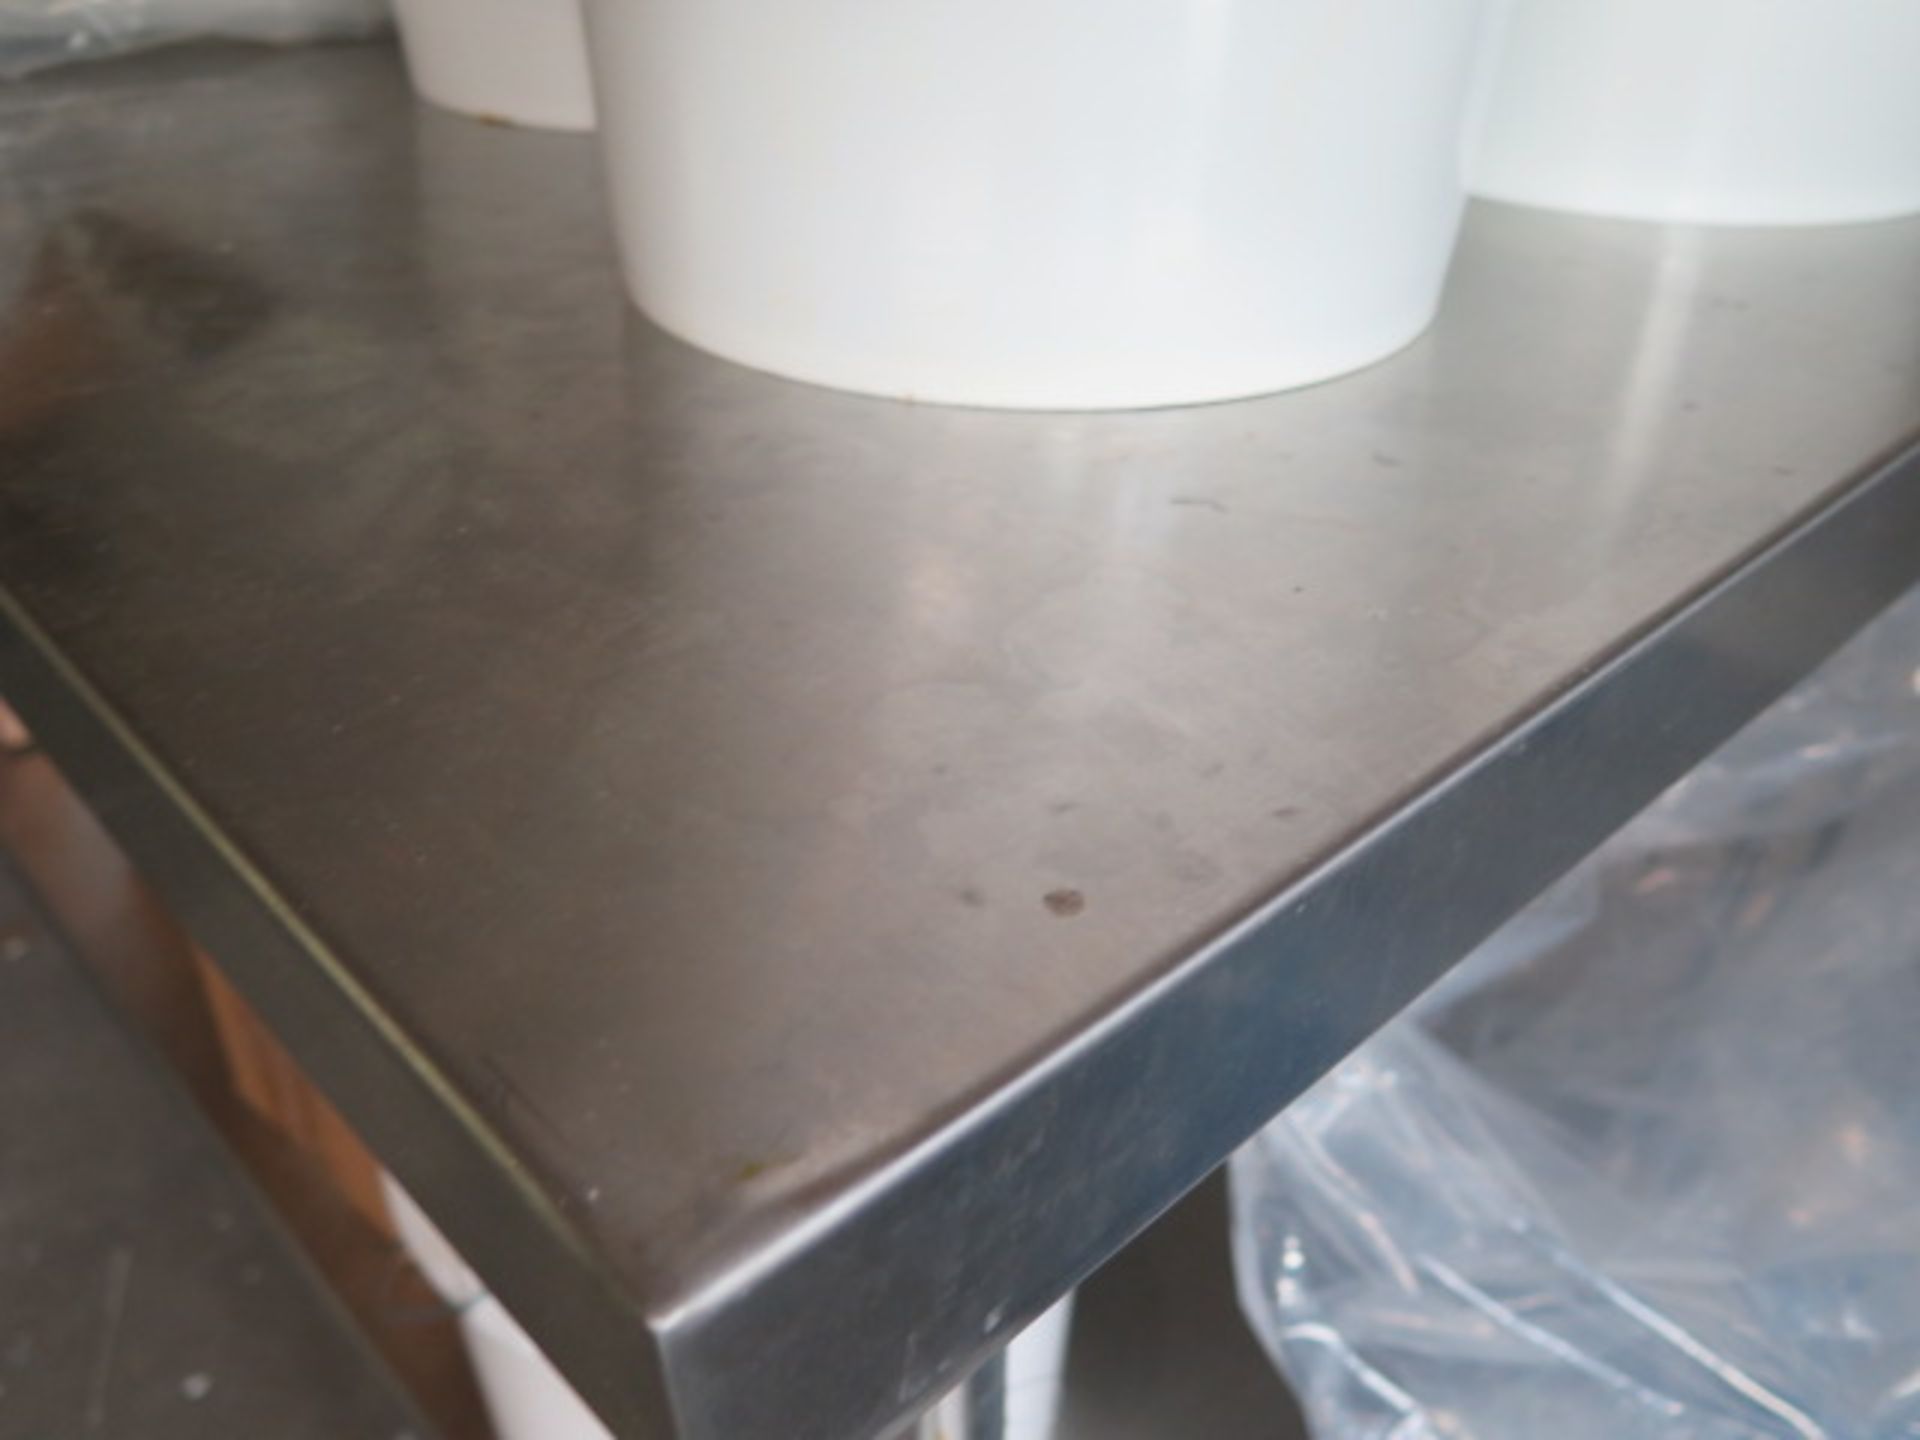 30" x 72" Stainless Steel Table w/ Back-Splash (SOLD AS-IS - NO WARRANTY) - Image 3 of 4